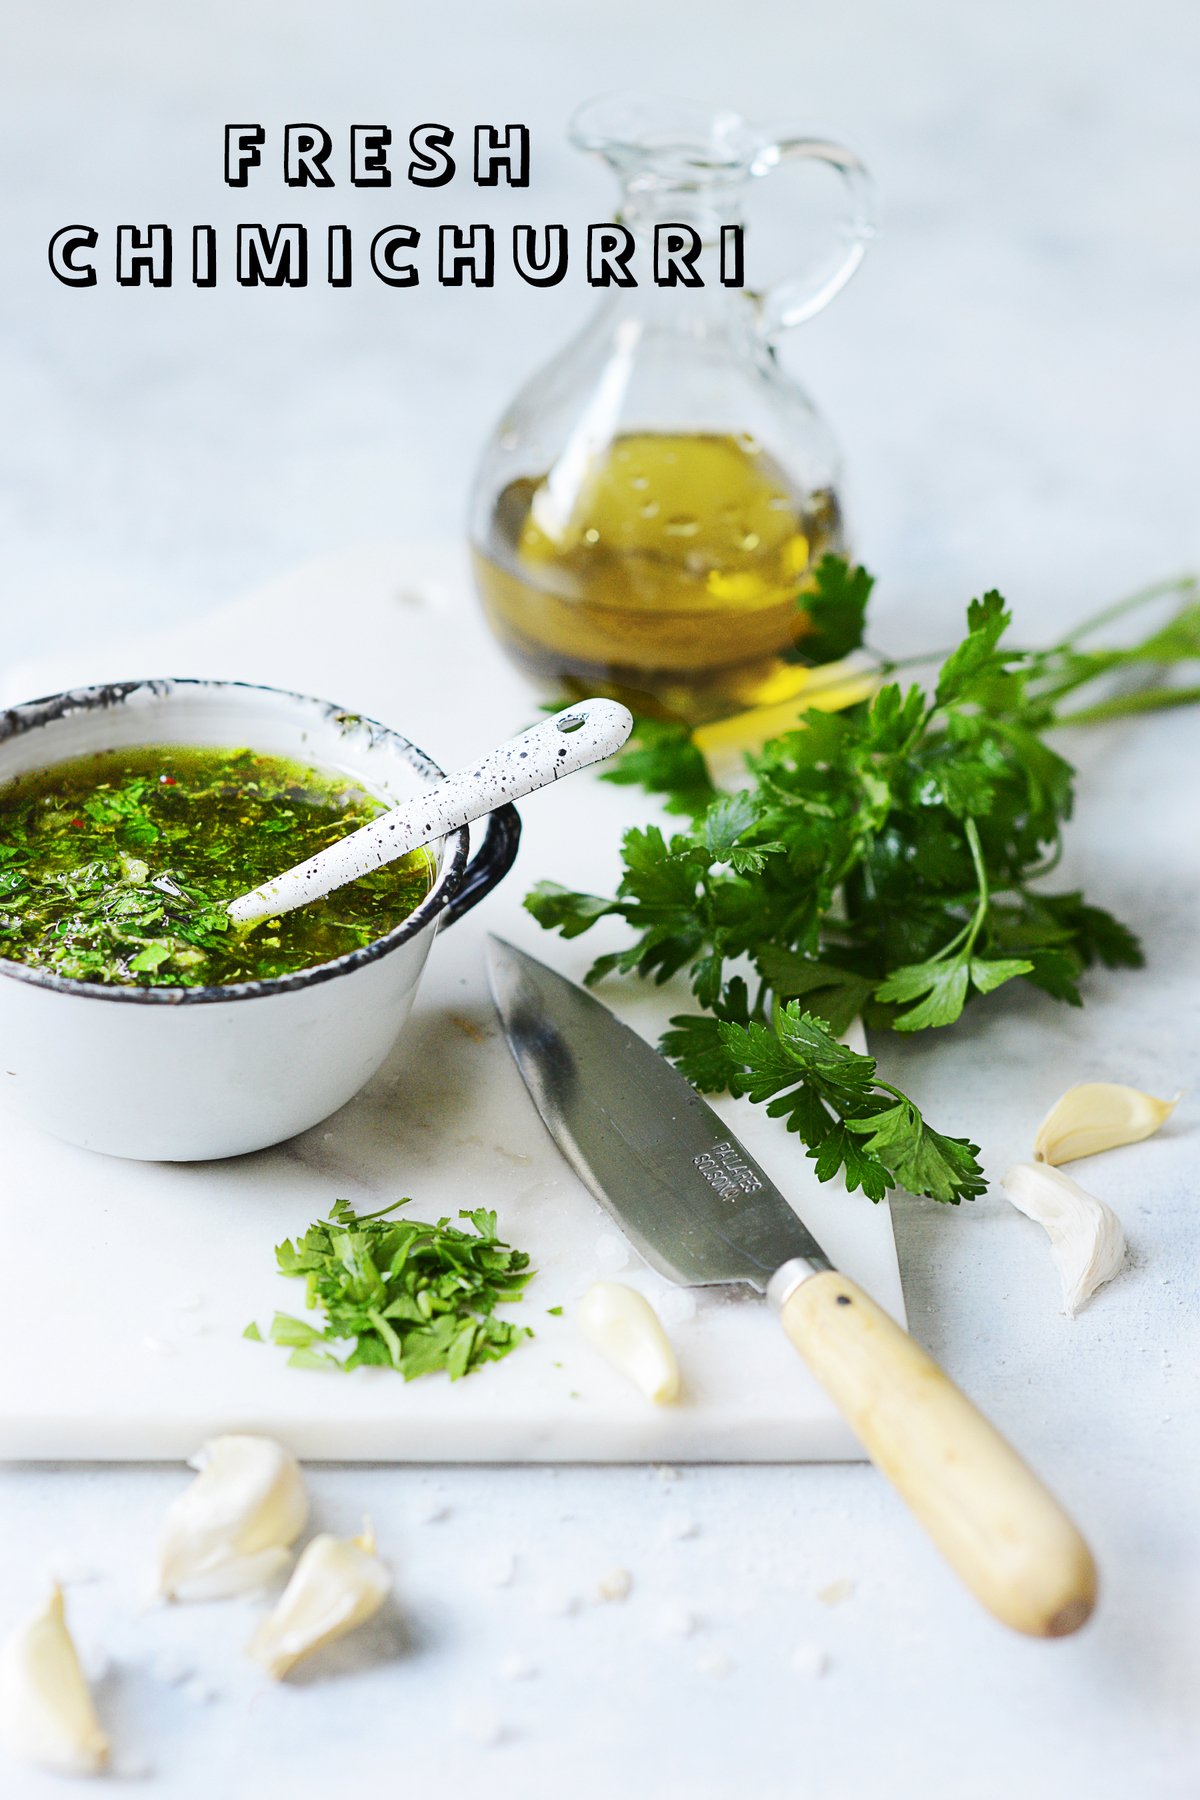 A white cutting board with a white cup filled with chimichurri. A bunch of herbs on the side